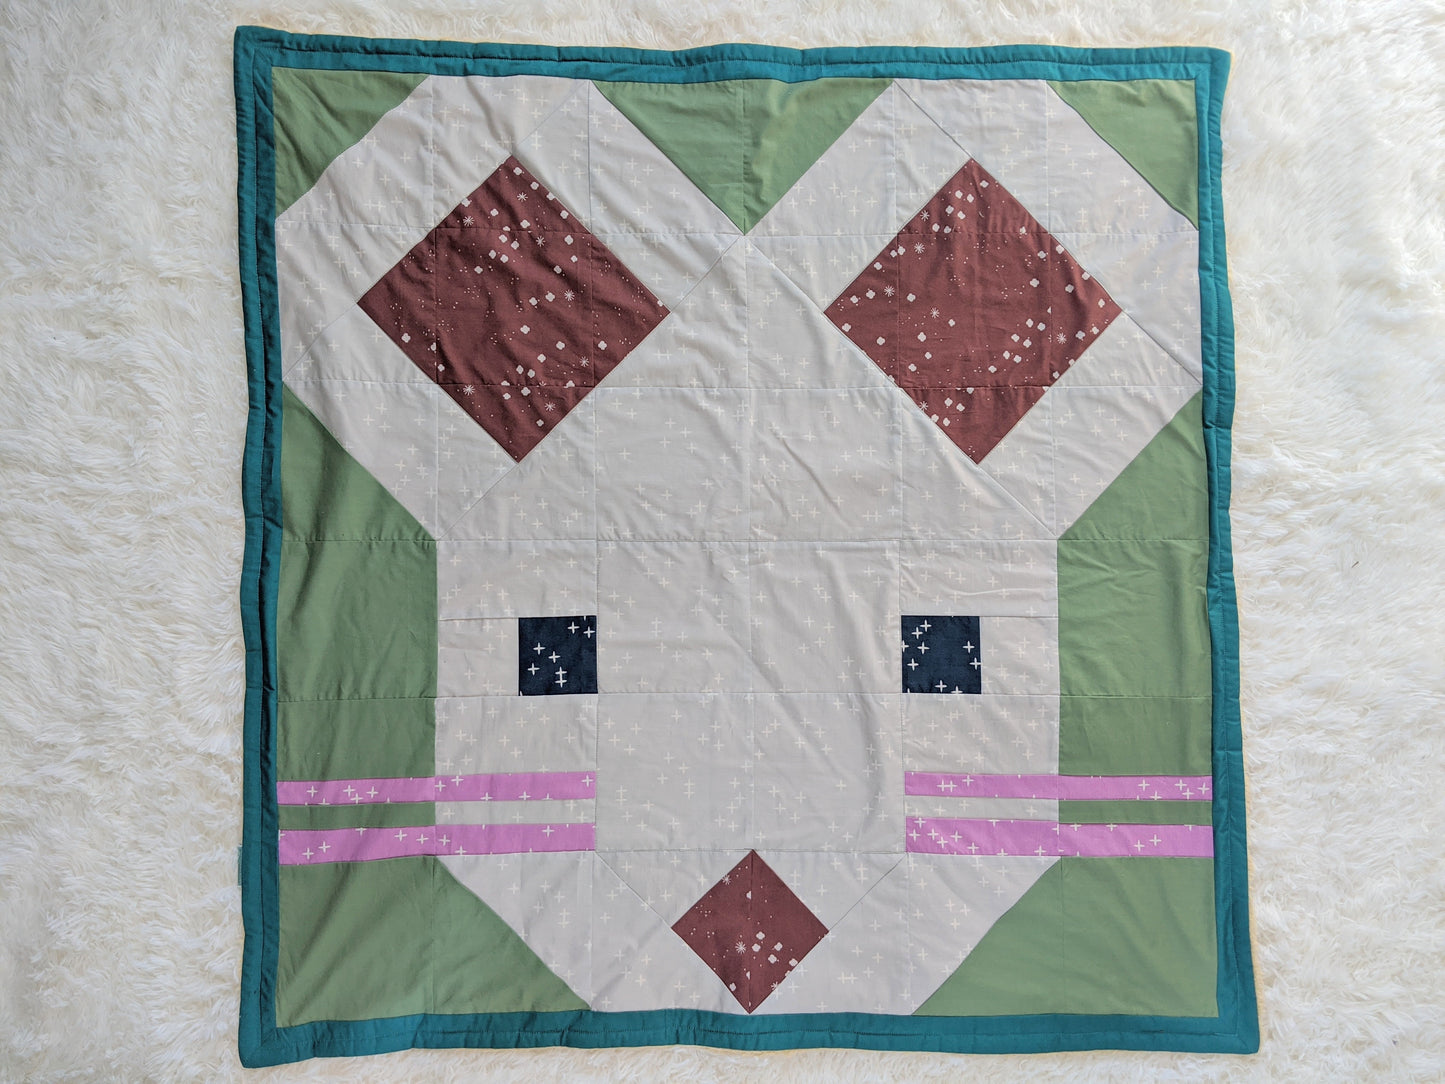 Baby Peipei- 2020: Year of the Rat or Mouse, backed with Butter Furry Sherpa. A quilt mouse pattern made up of square, triangle, and rectangular patches.